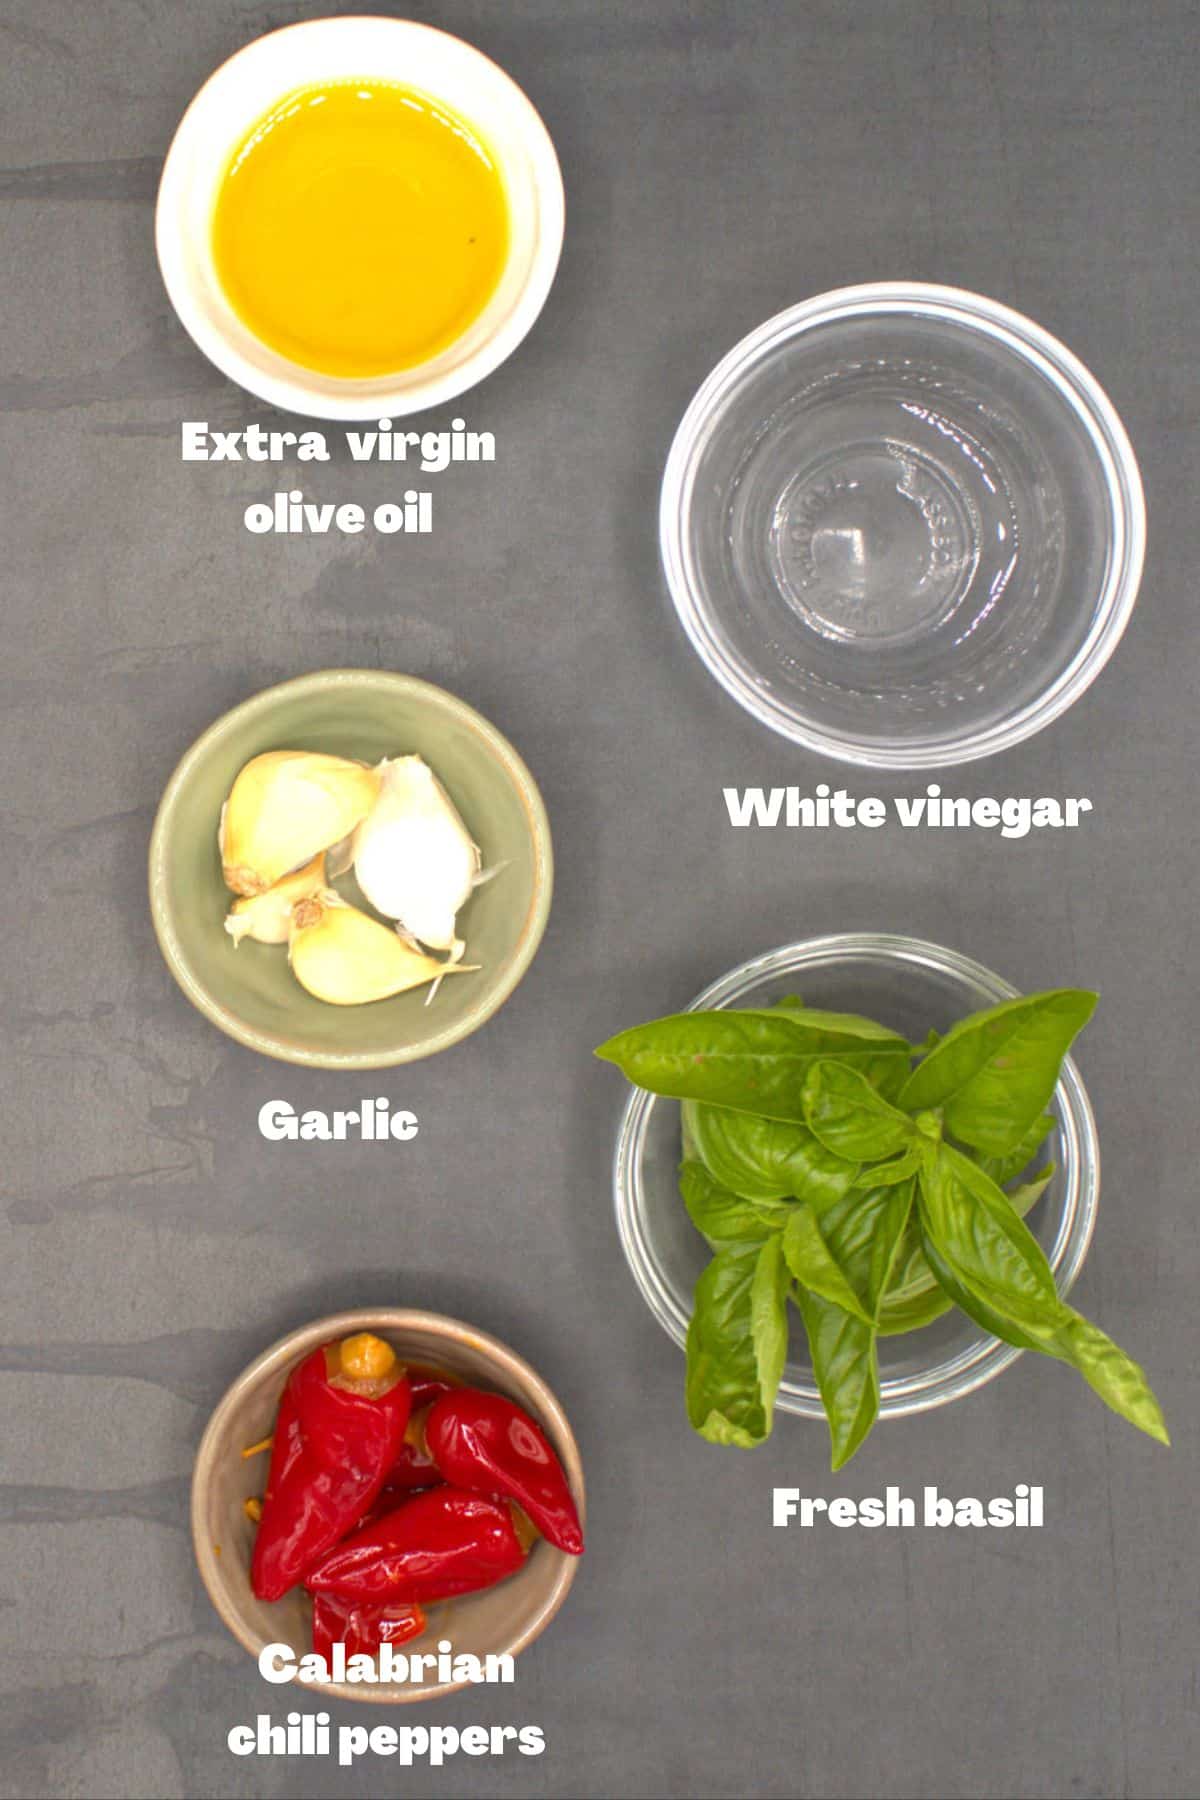 Ingredients for Calabrian chili paste, including garlic, olive oil, basil, vinegar and Calabrian chili peppers.